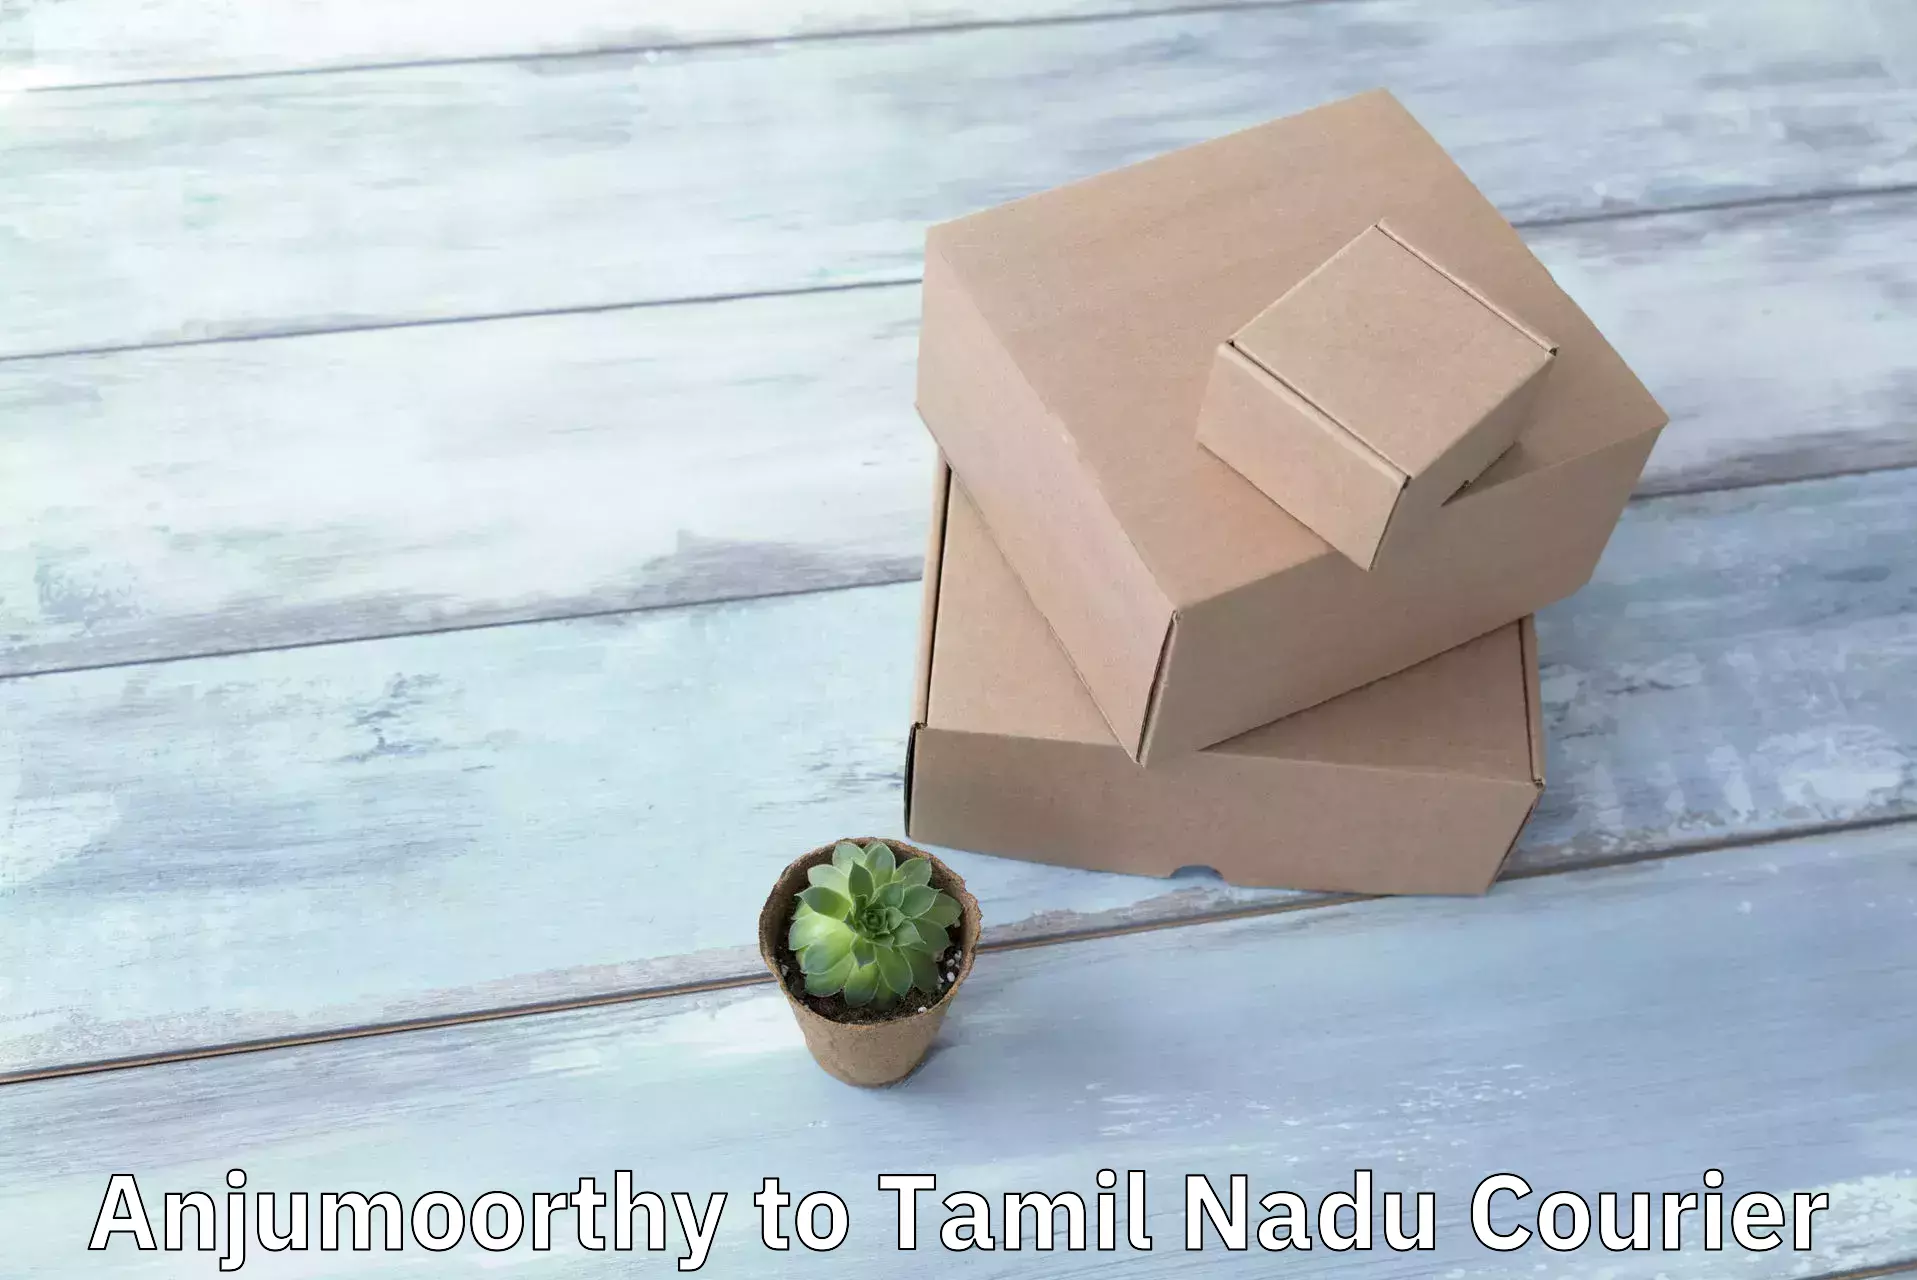 Trackable shipping service Anjumoorthy to Velur